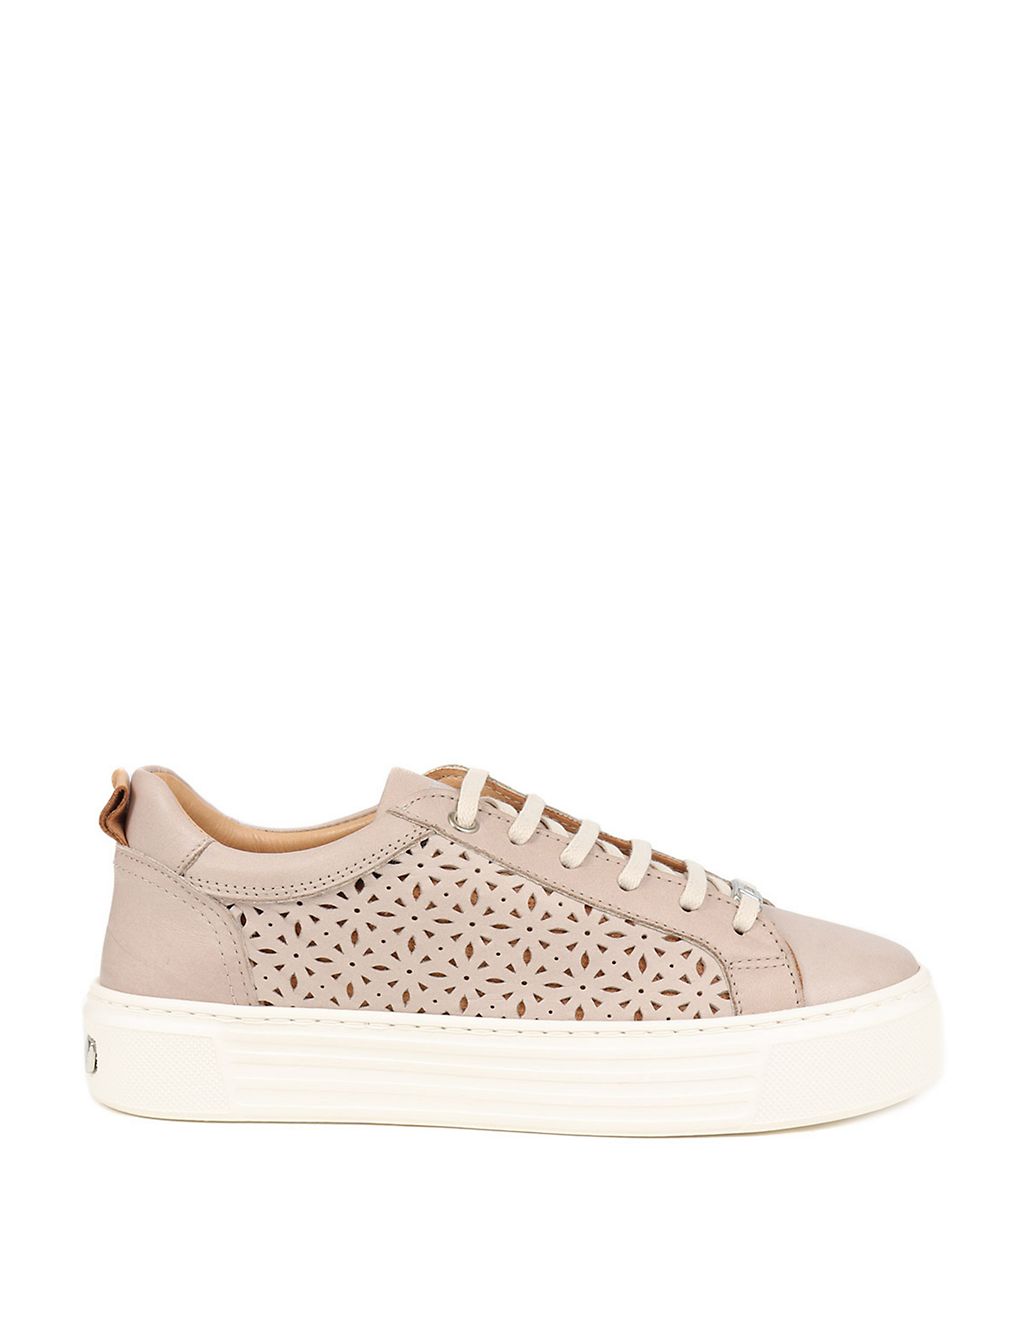 Leather Lace Up Perforated Flatform Trainers 1 of 7